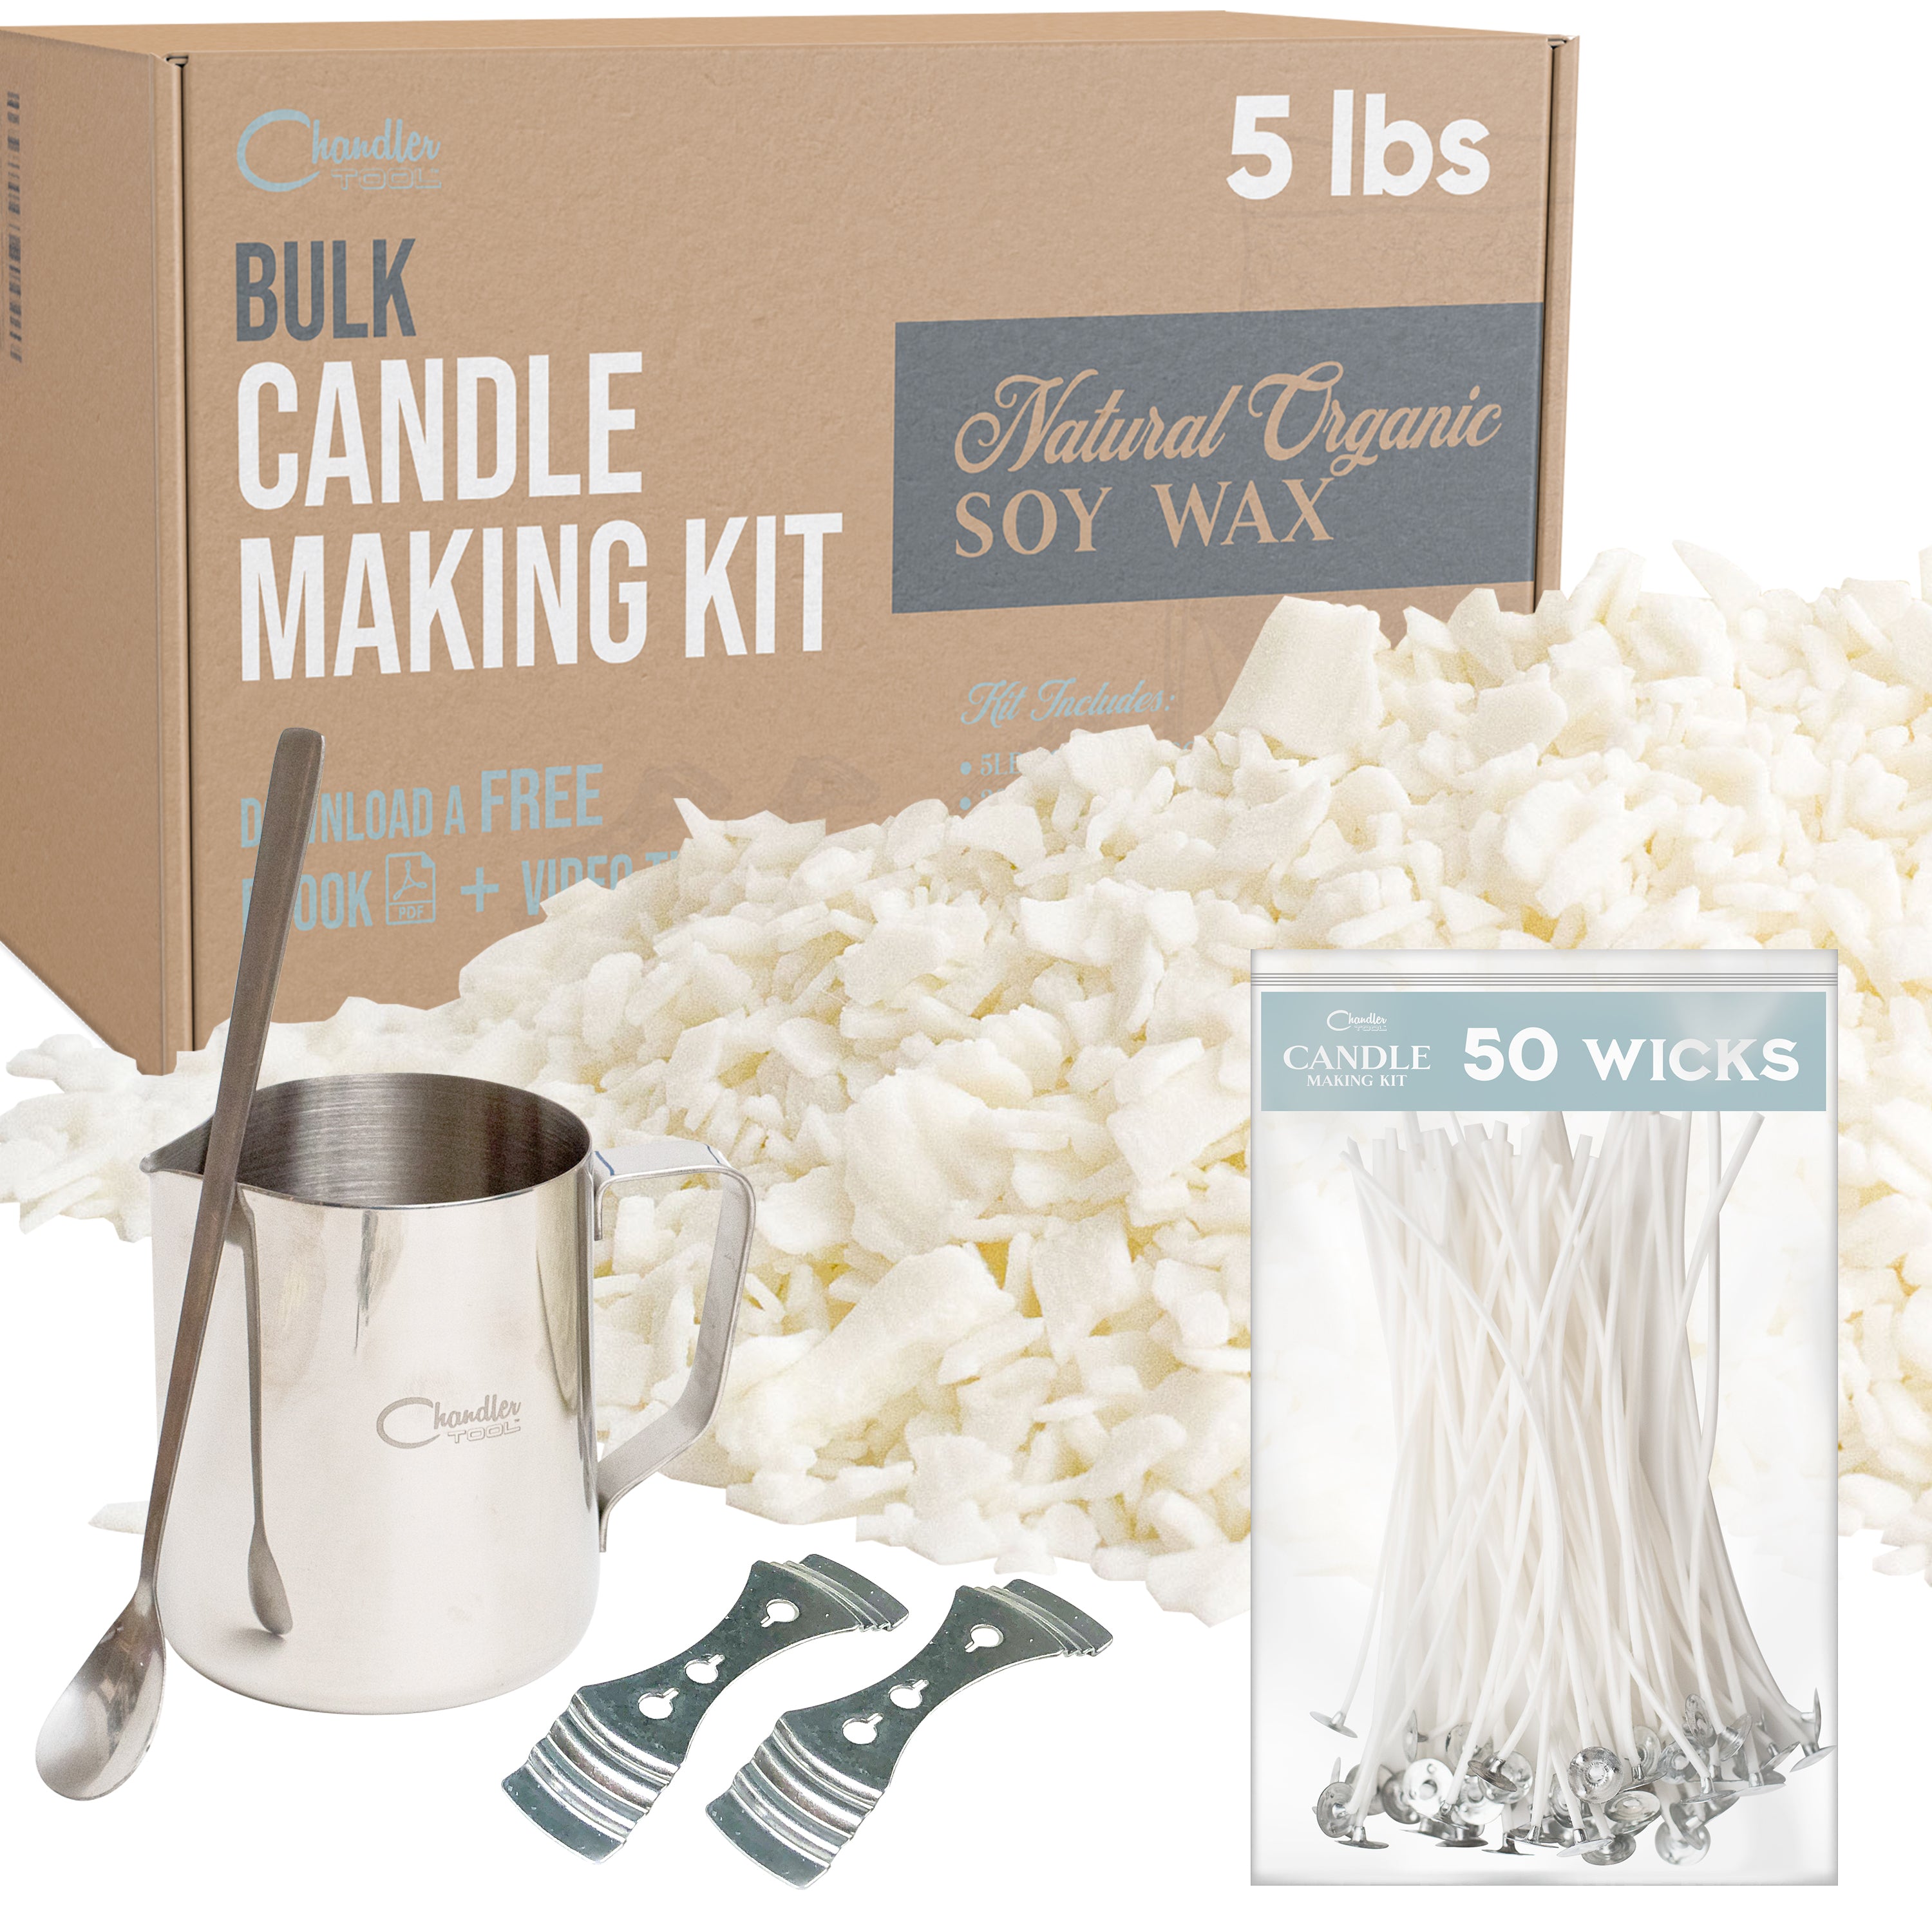 Candle Making Kit,Easy to Make Colored Candle Soy Wax Kit